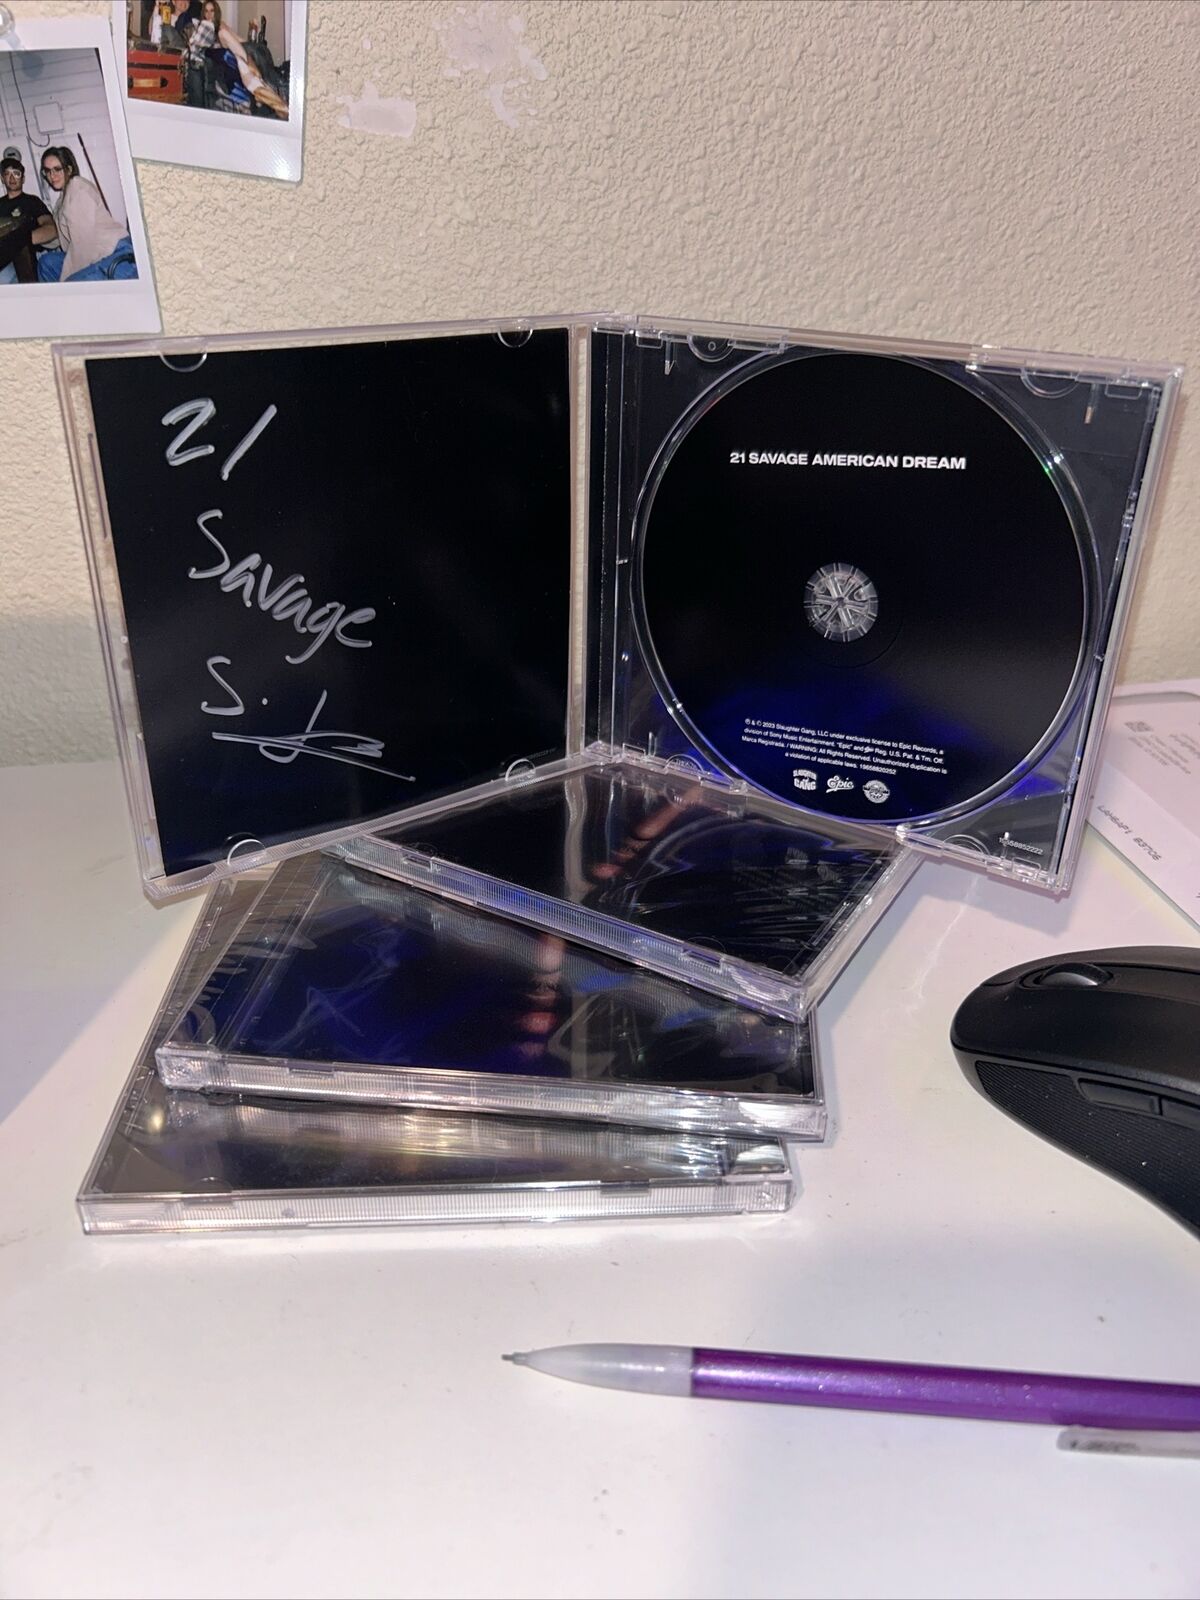 21 savage SIGNED Autographed AMERICAN DREAM ALT. COVER EXCLUSIVE CD